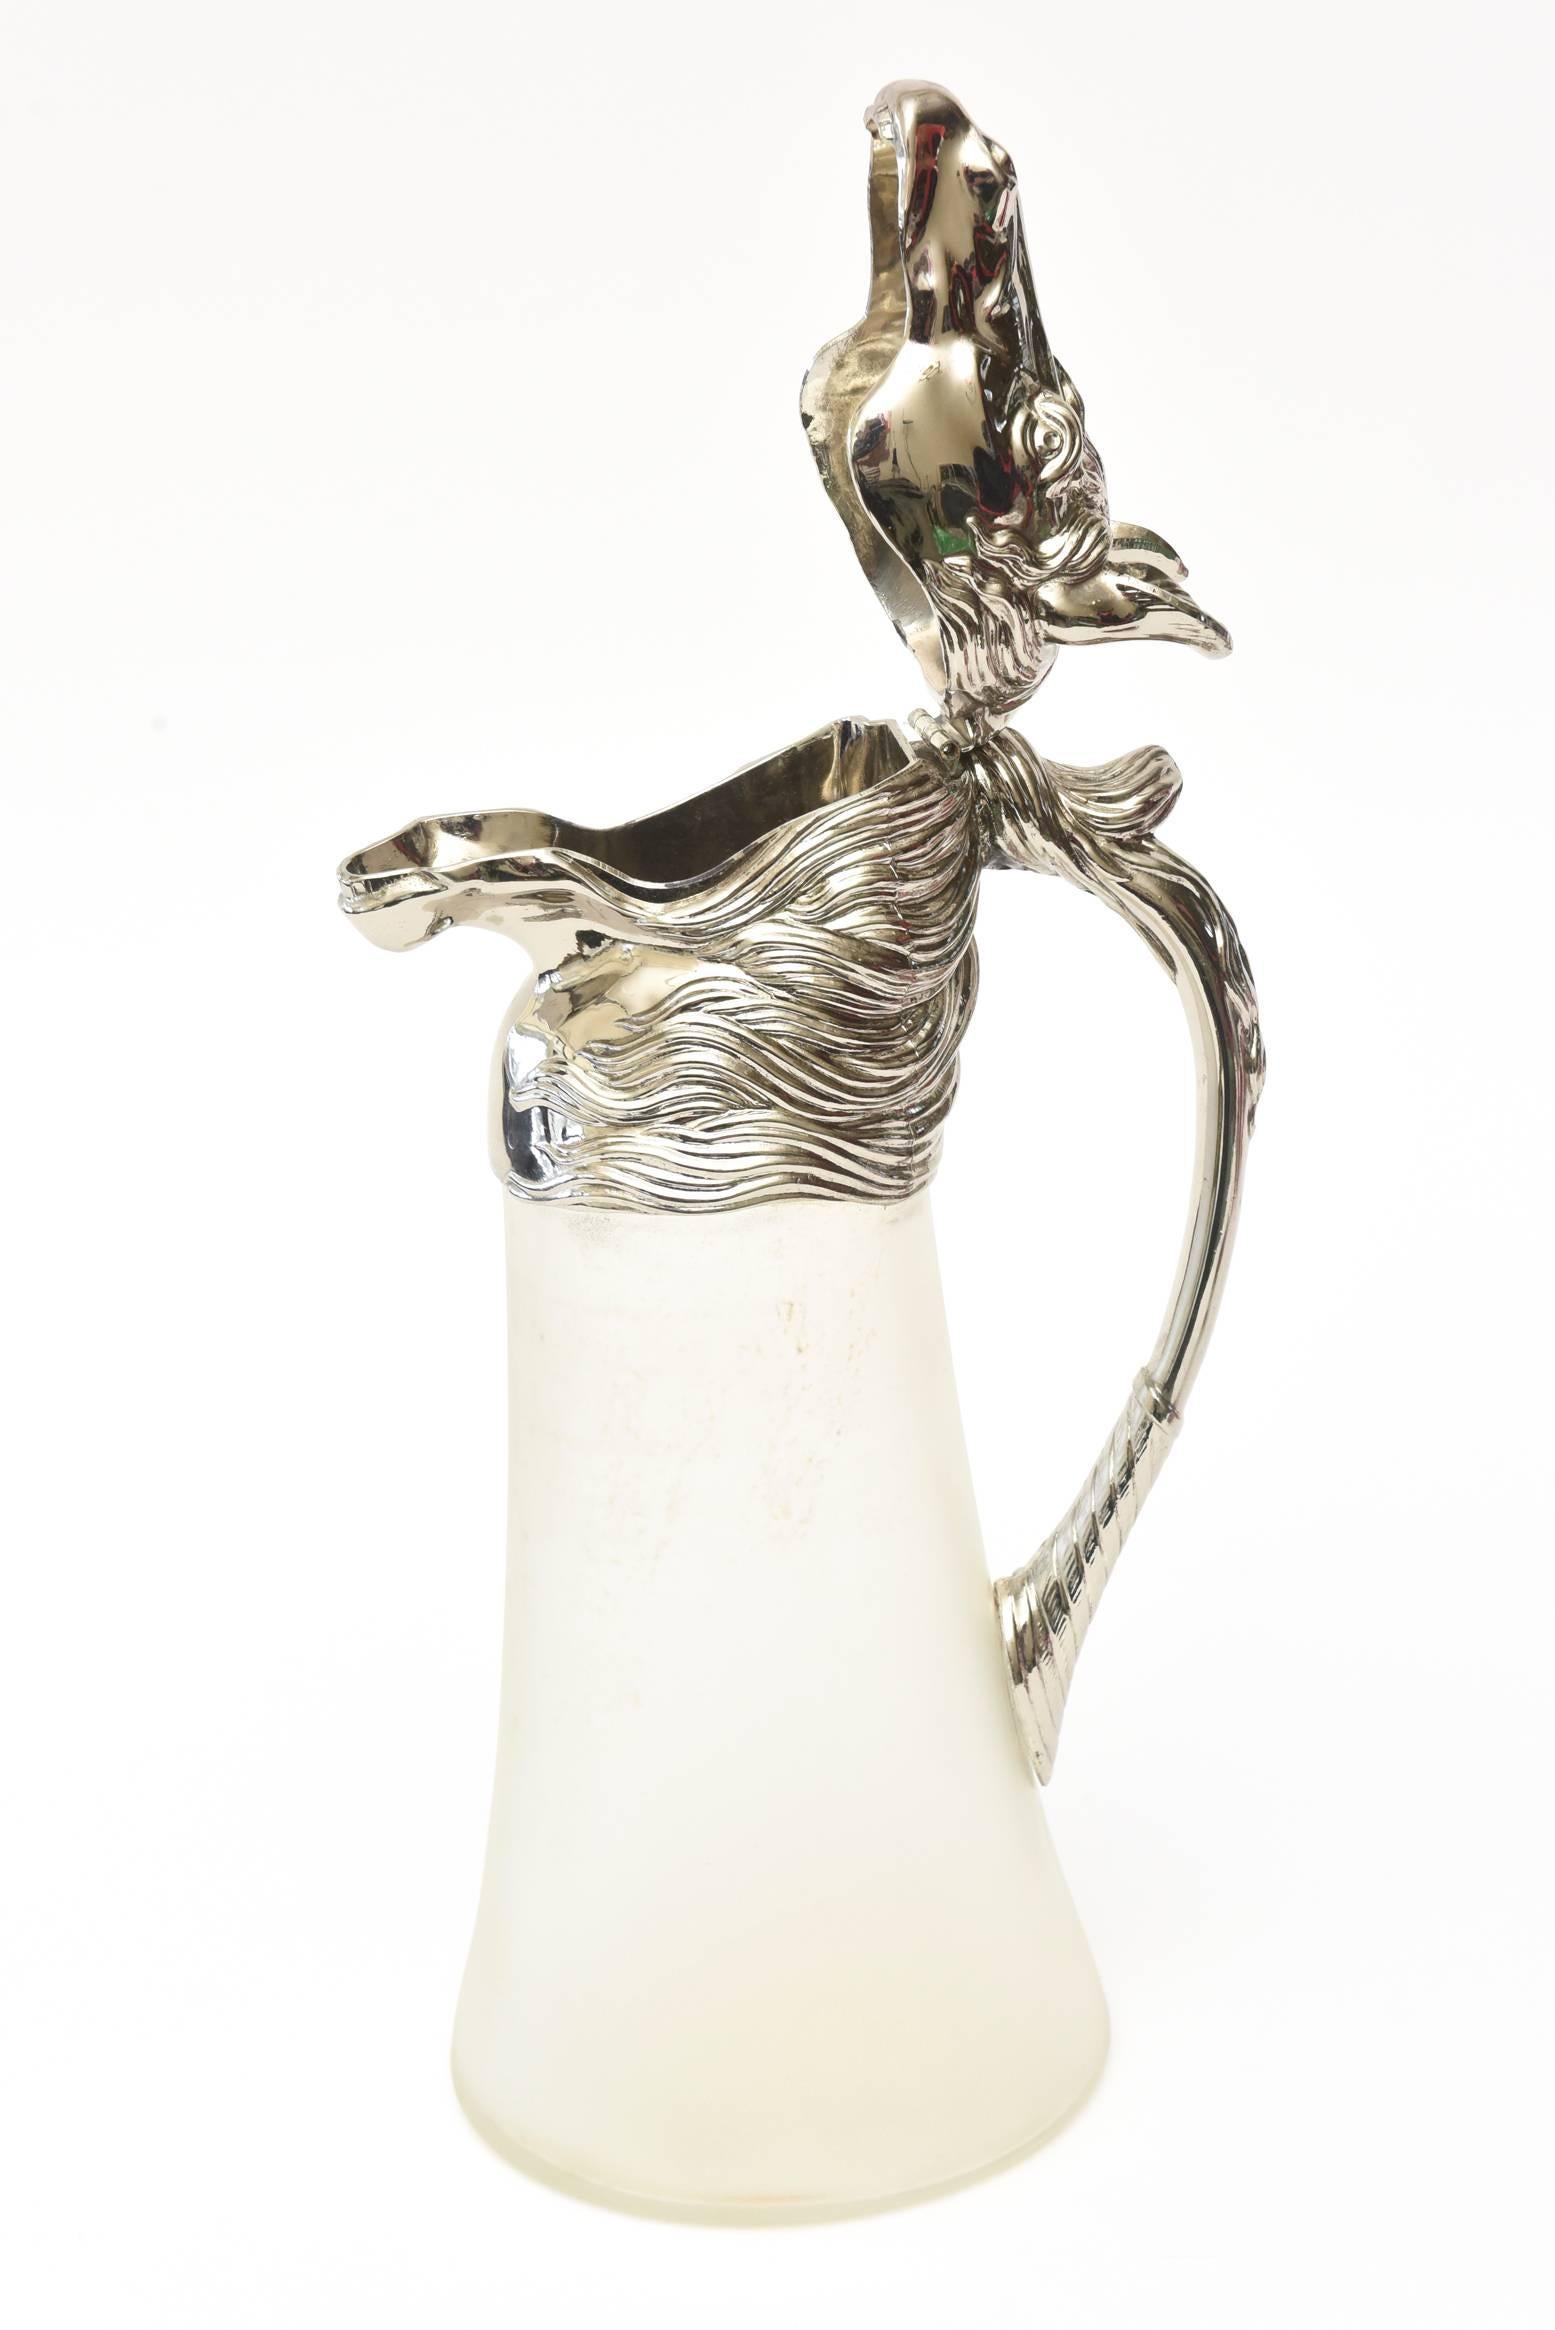 Verre brun Nickel-Plated and Frosted Glass Horse Decanter Pitcher Barware Vintage en vente